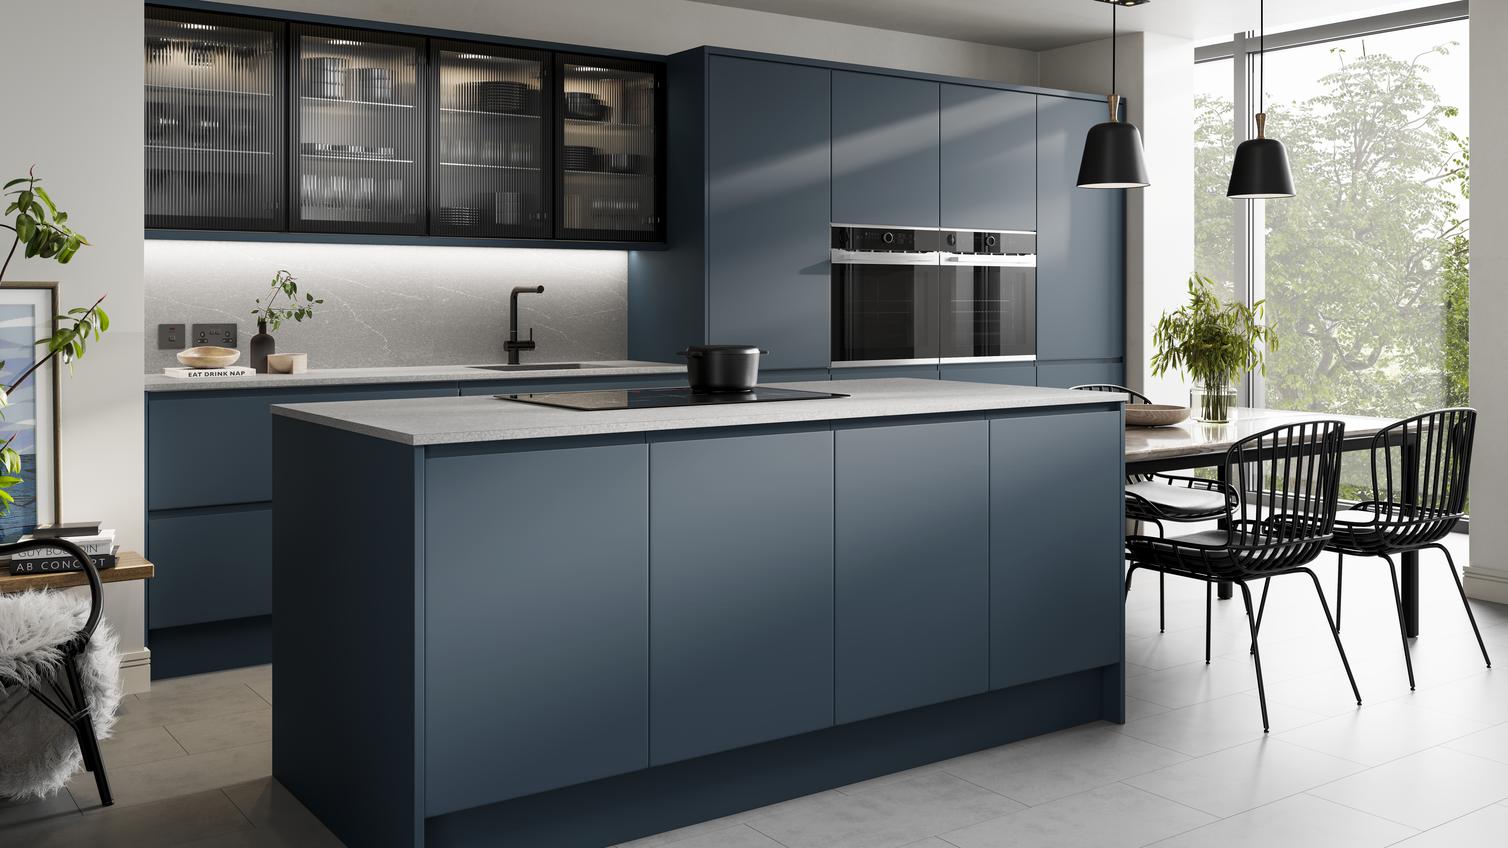 Contemporary marine blue kitchen in an island layout with a matt finish. Includes a grey worktop and black glass wall units.